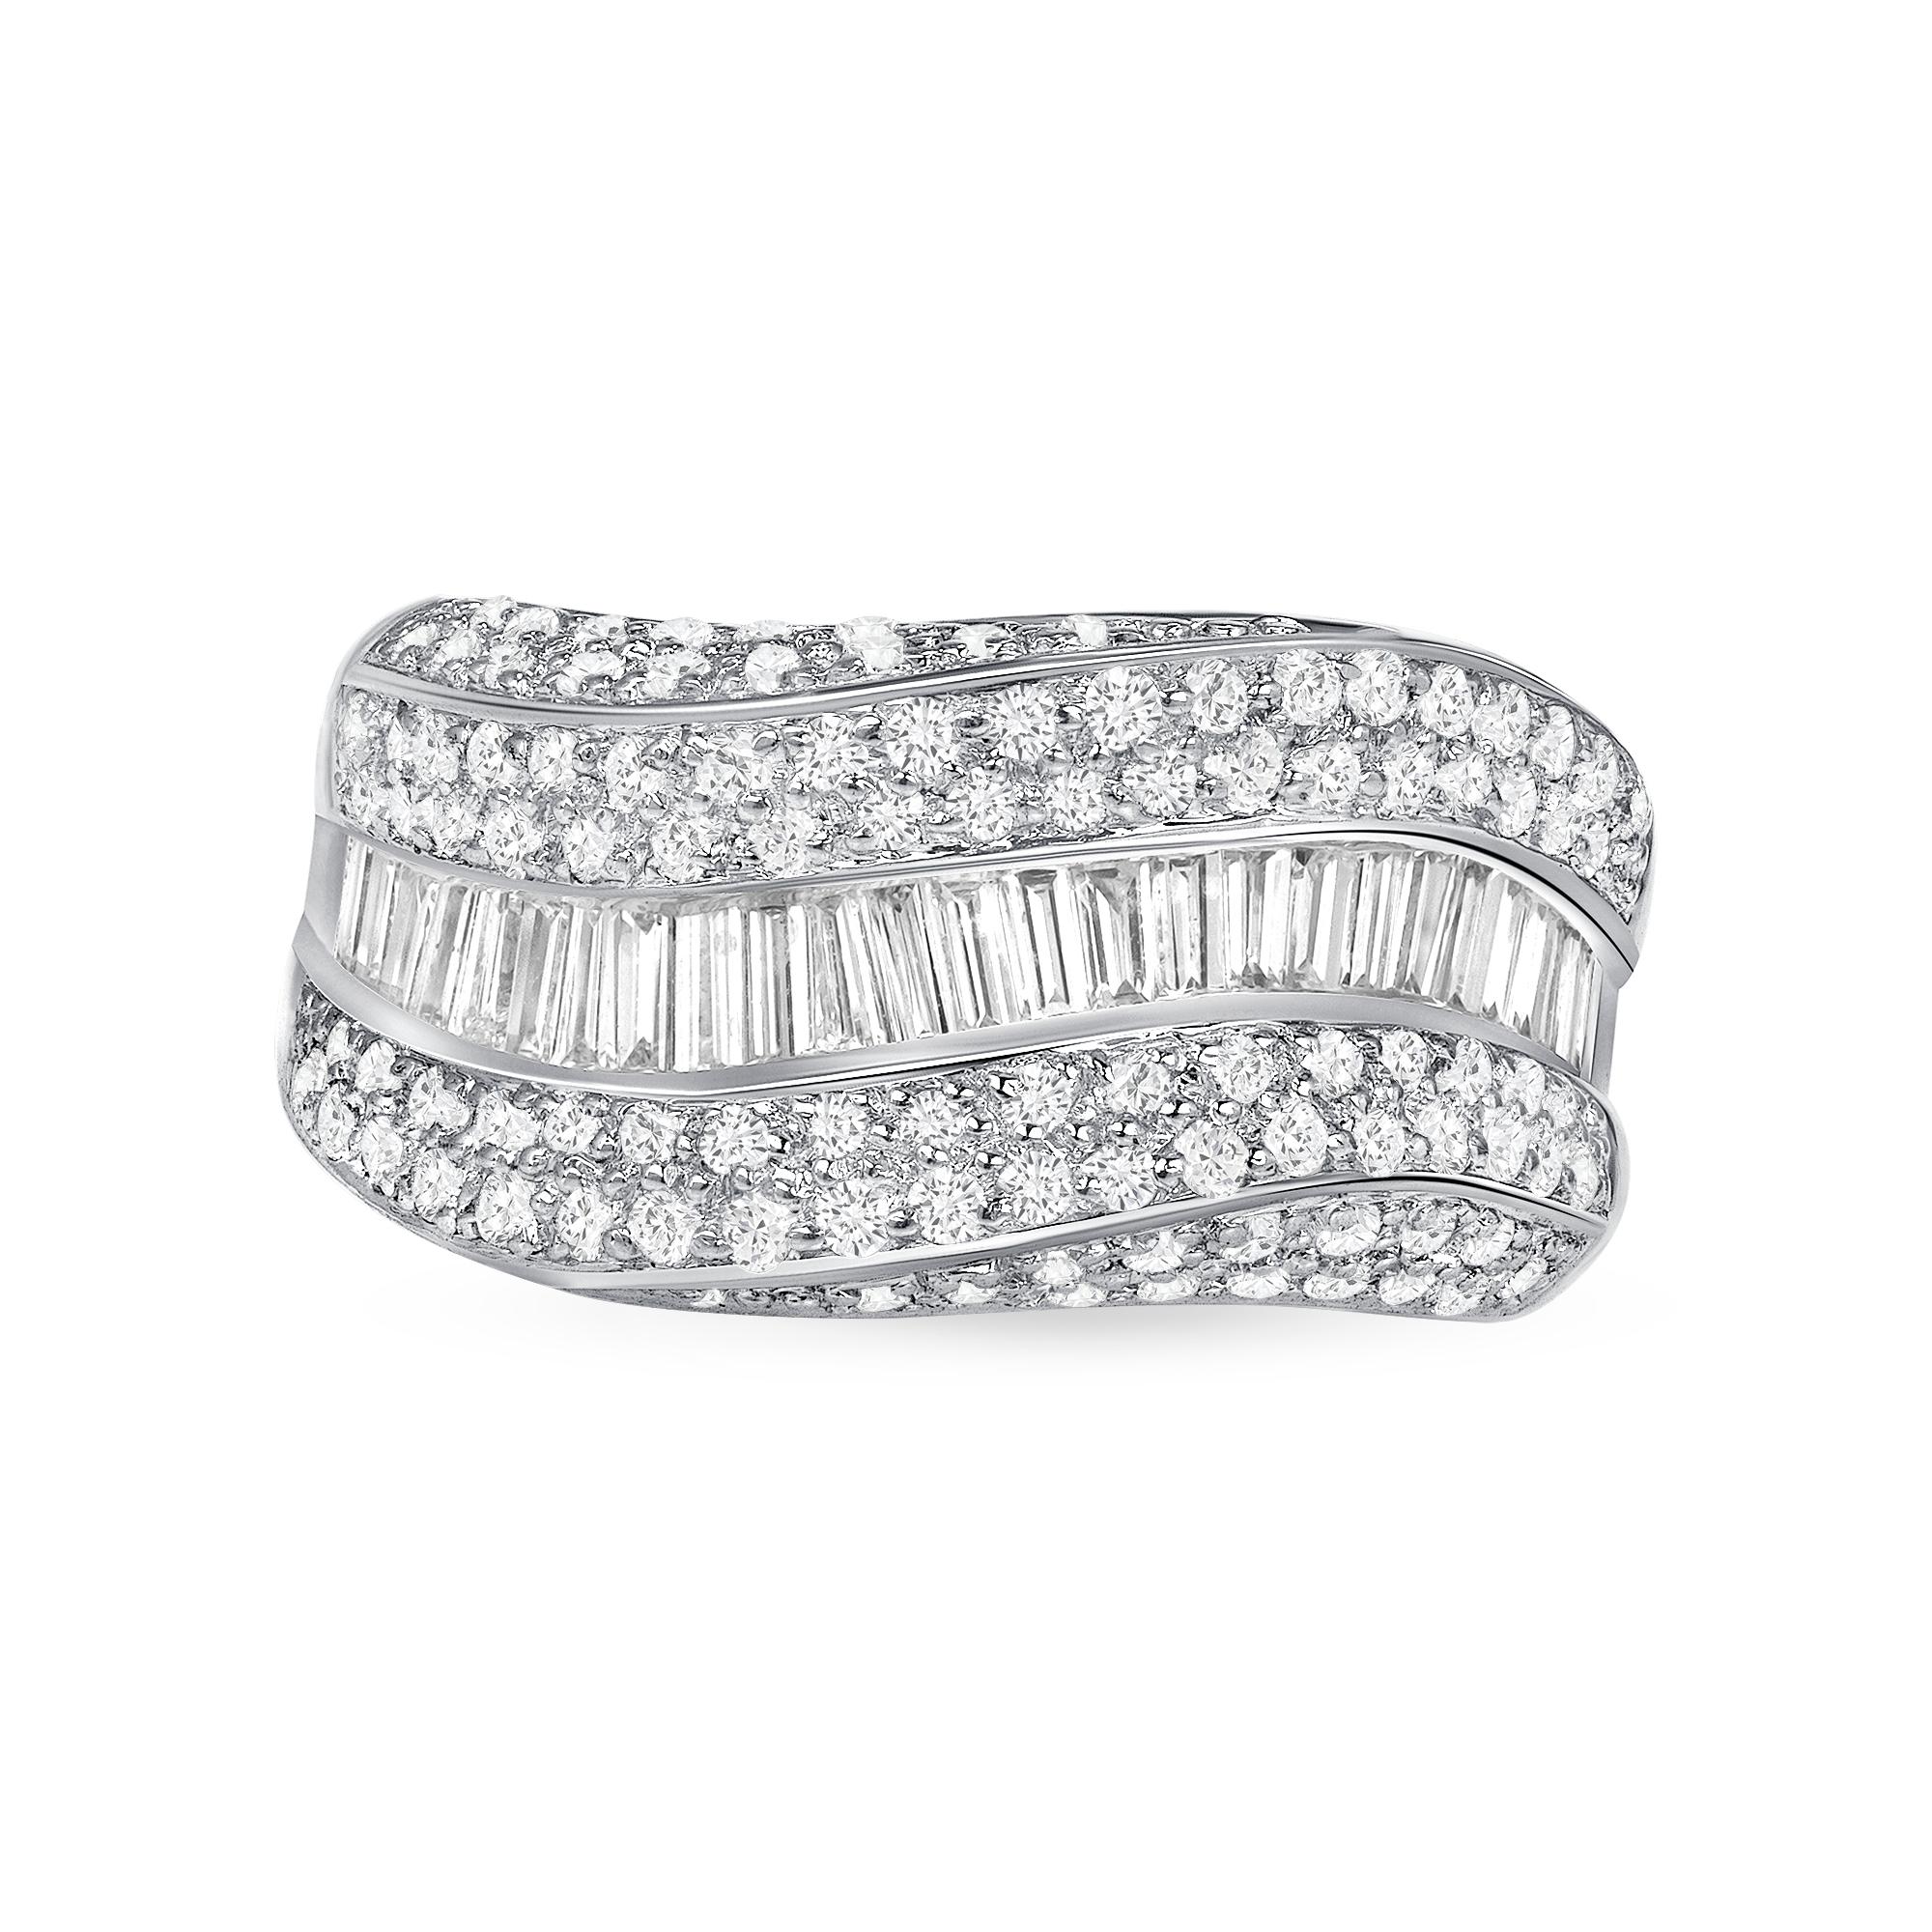 18K White Gold with Baguettes & Round Genuine Diamonds
Round Diamonds: 0.86 carats
Genuine Baguette Diamonds: 1.16 carats
Gold Weight: 12.5 grams 